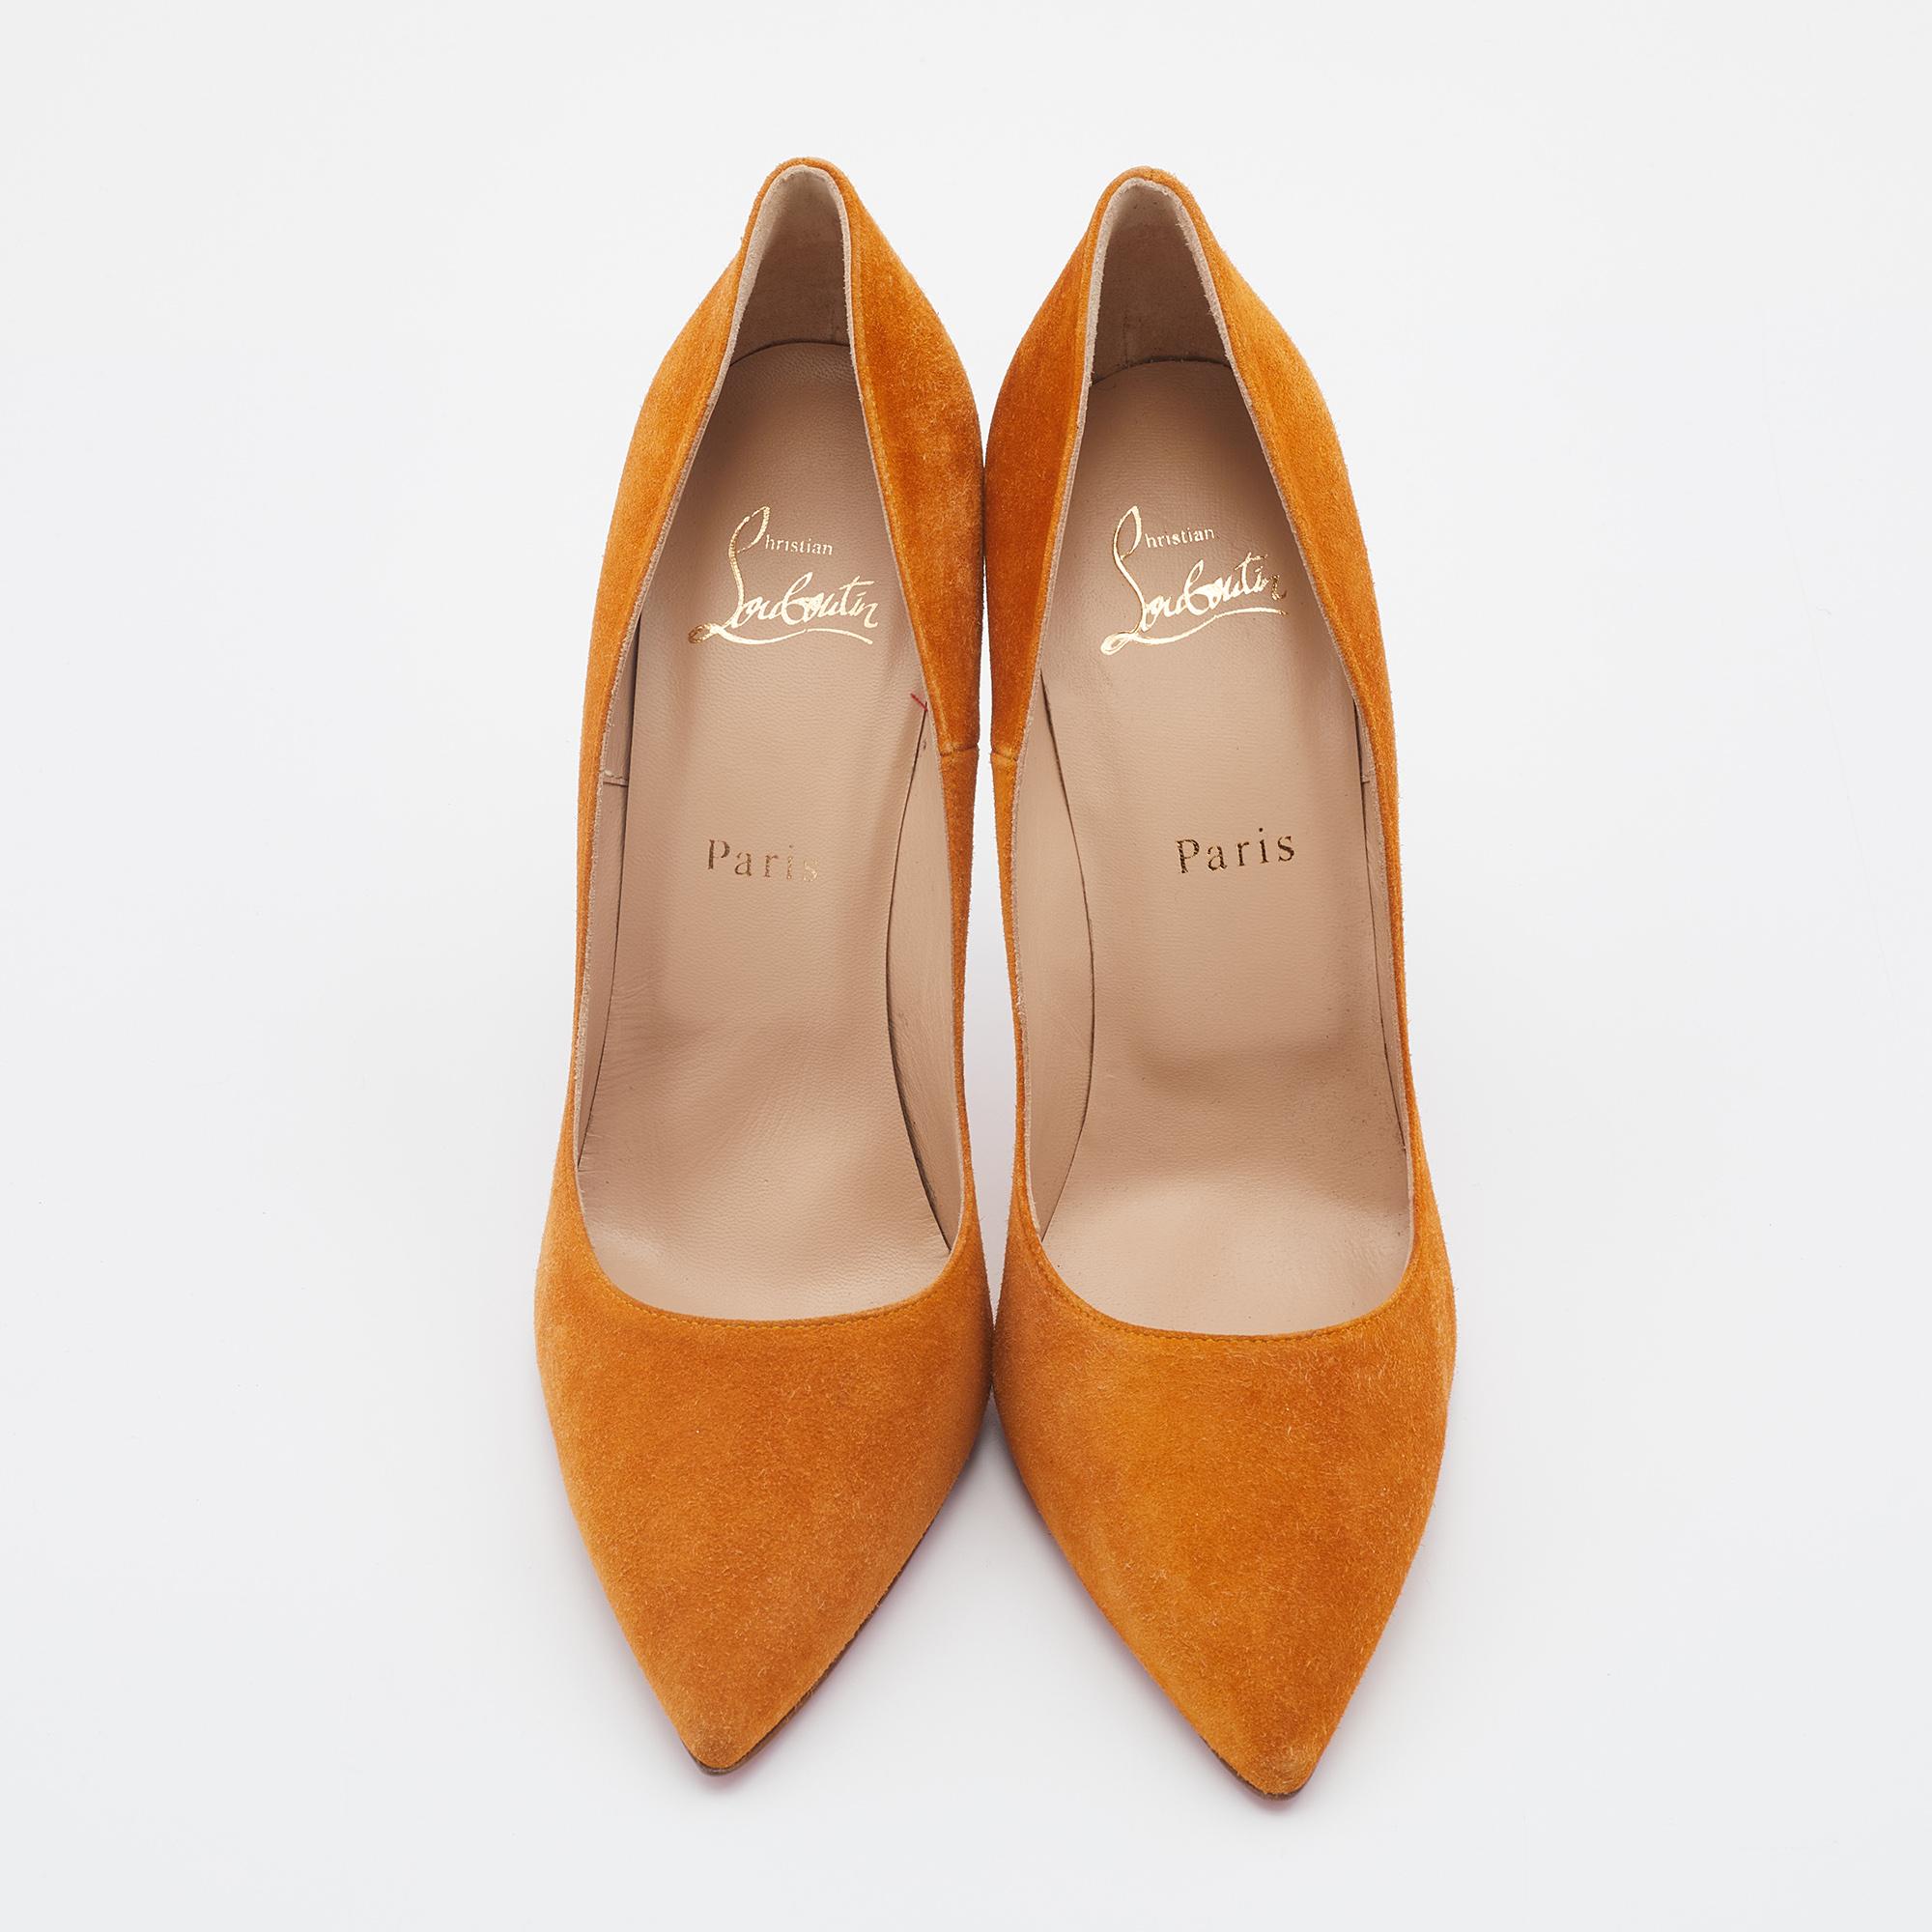 Named after English model Kate Moss, this pair of Christian Louboutin So Kate pumps reflects elegance and sophistication in every step. Proving the brand's expertise in the art of stiletto making, it has been strikingly crafted from mustard yellow